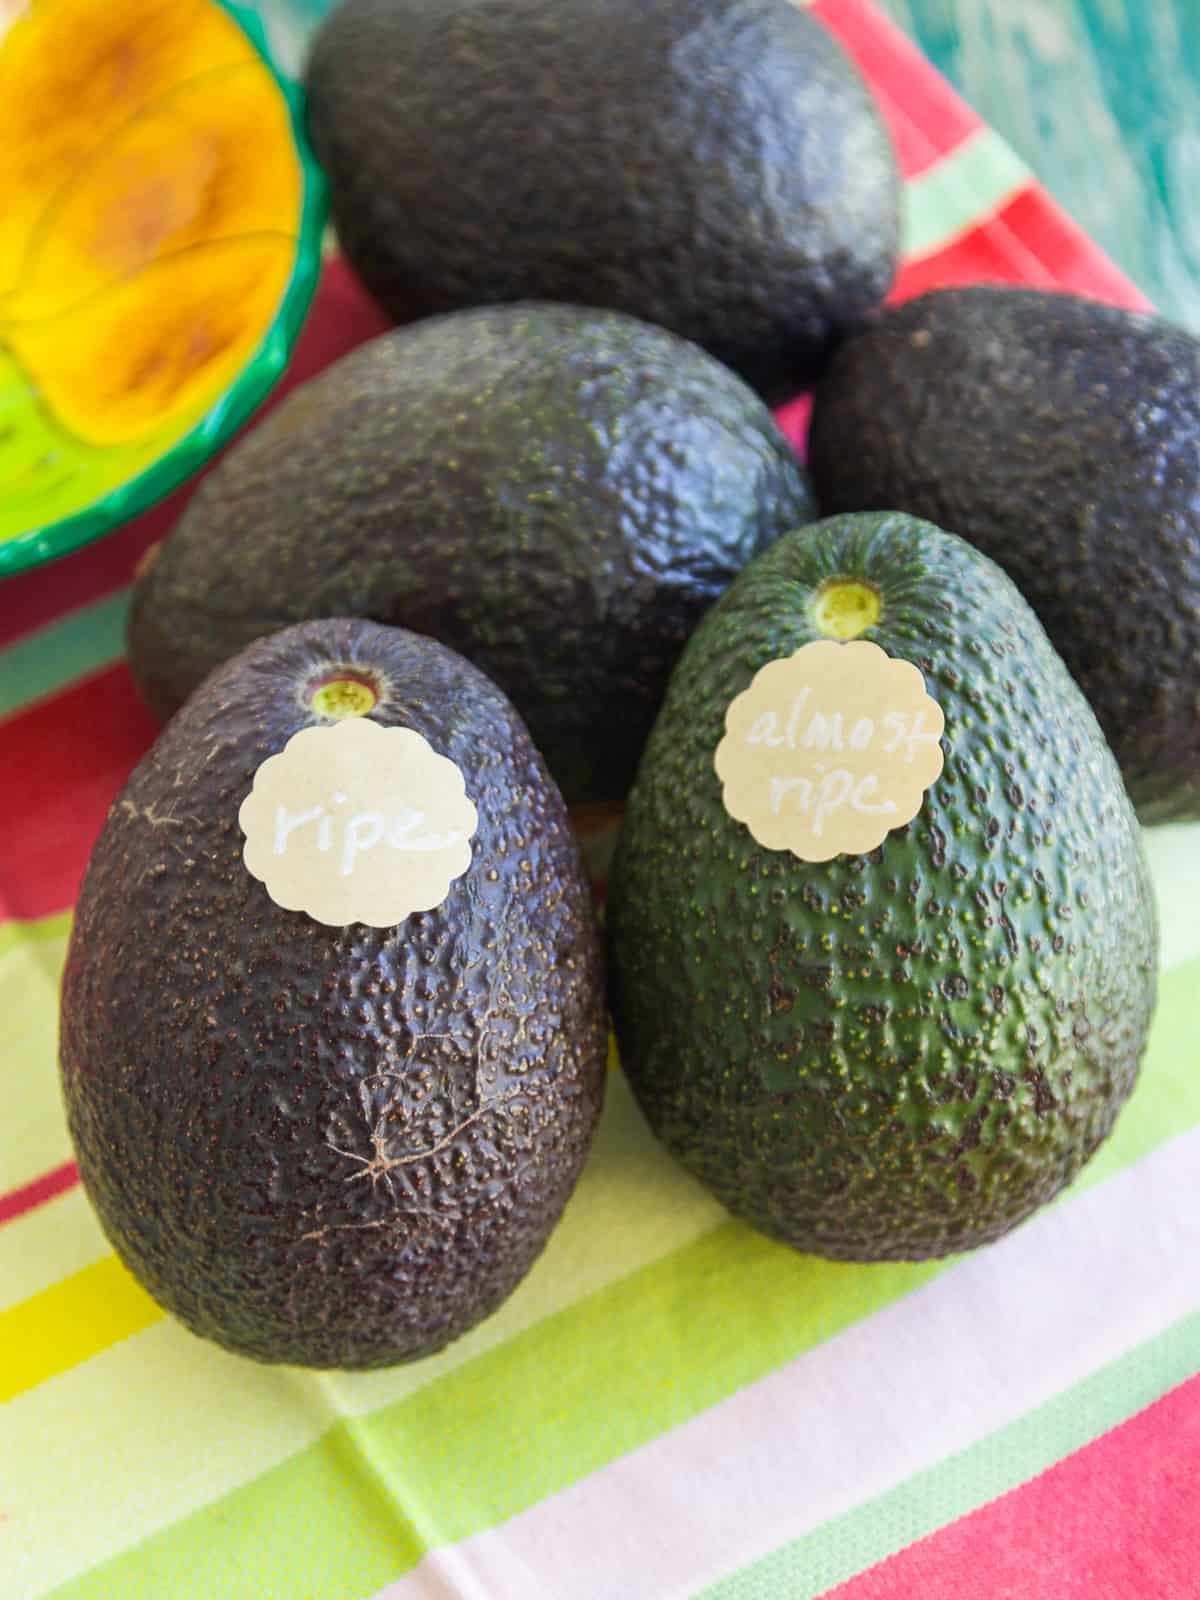 Two avocados labeled with stickers that say ripe and almost ripe on a colorful striped towel.